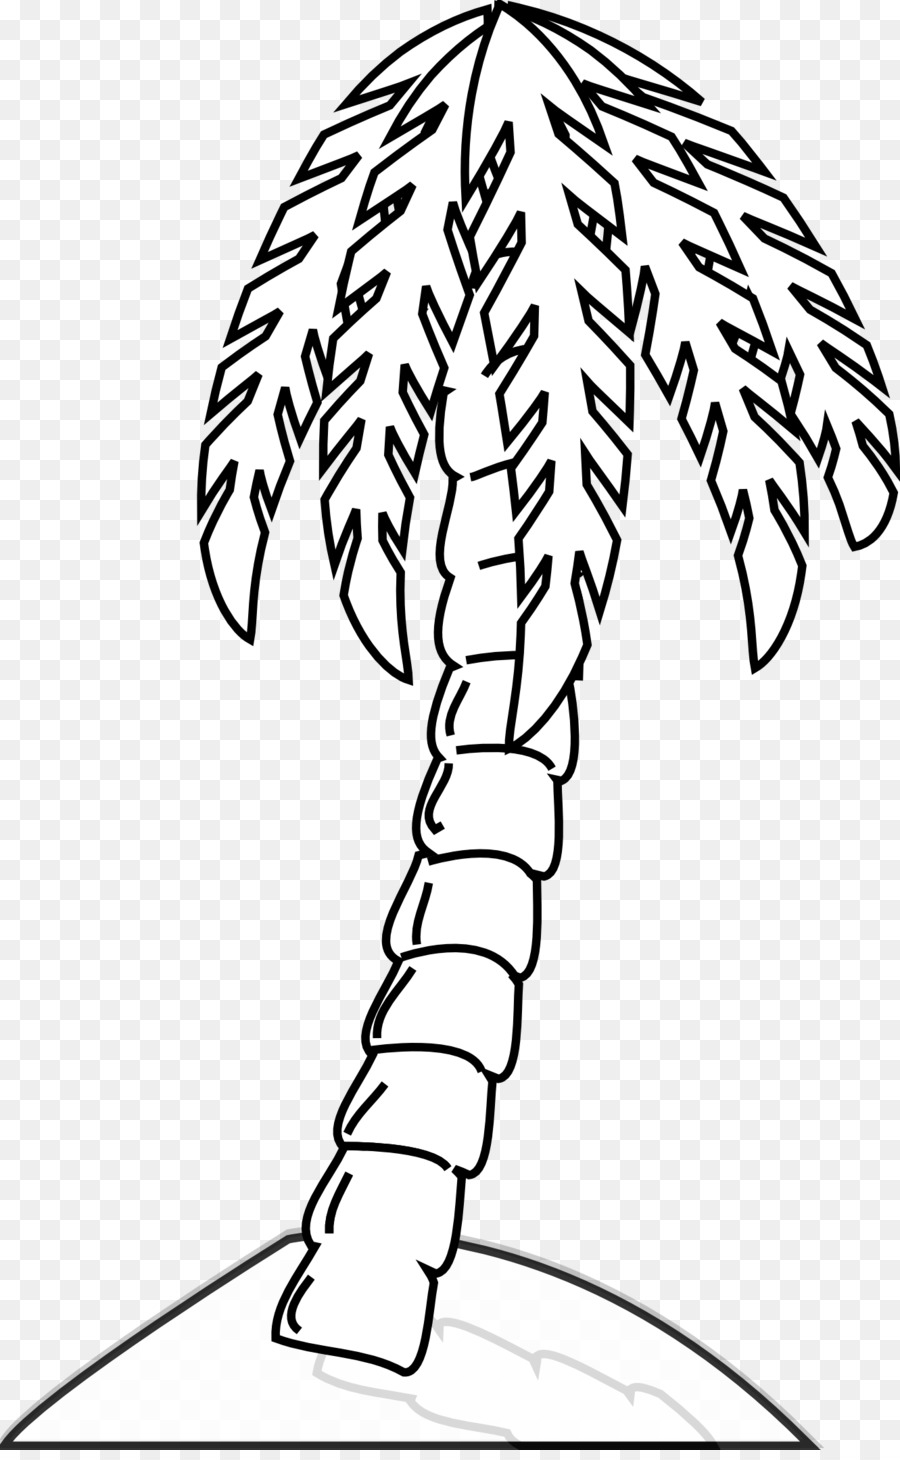 Arecaceae Tree Drawing Black and white Clip art - Tree Line Art png download - 1331*2144 - Free Transparent Arecaceae png Download.